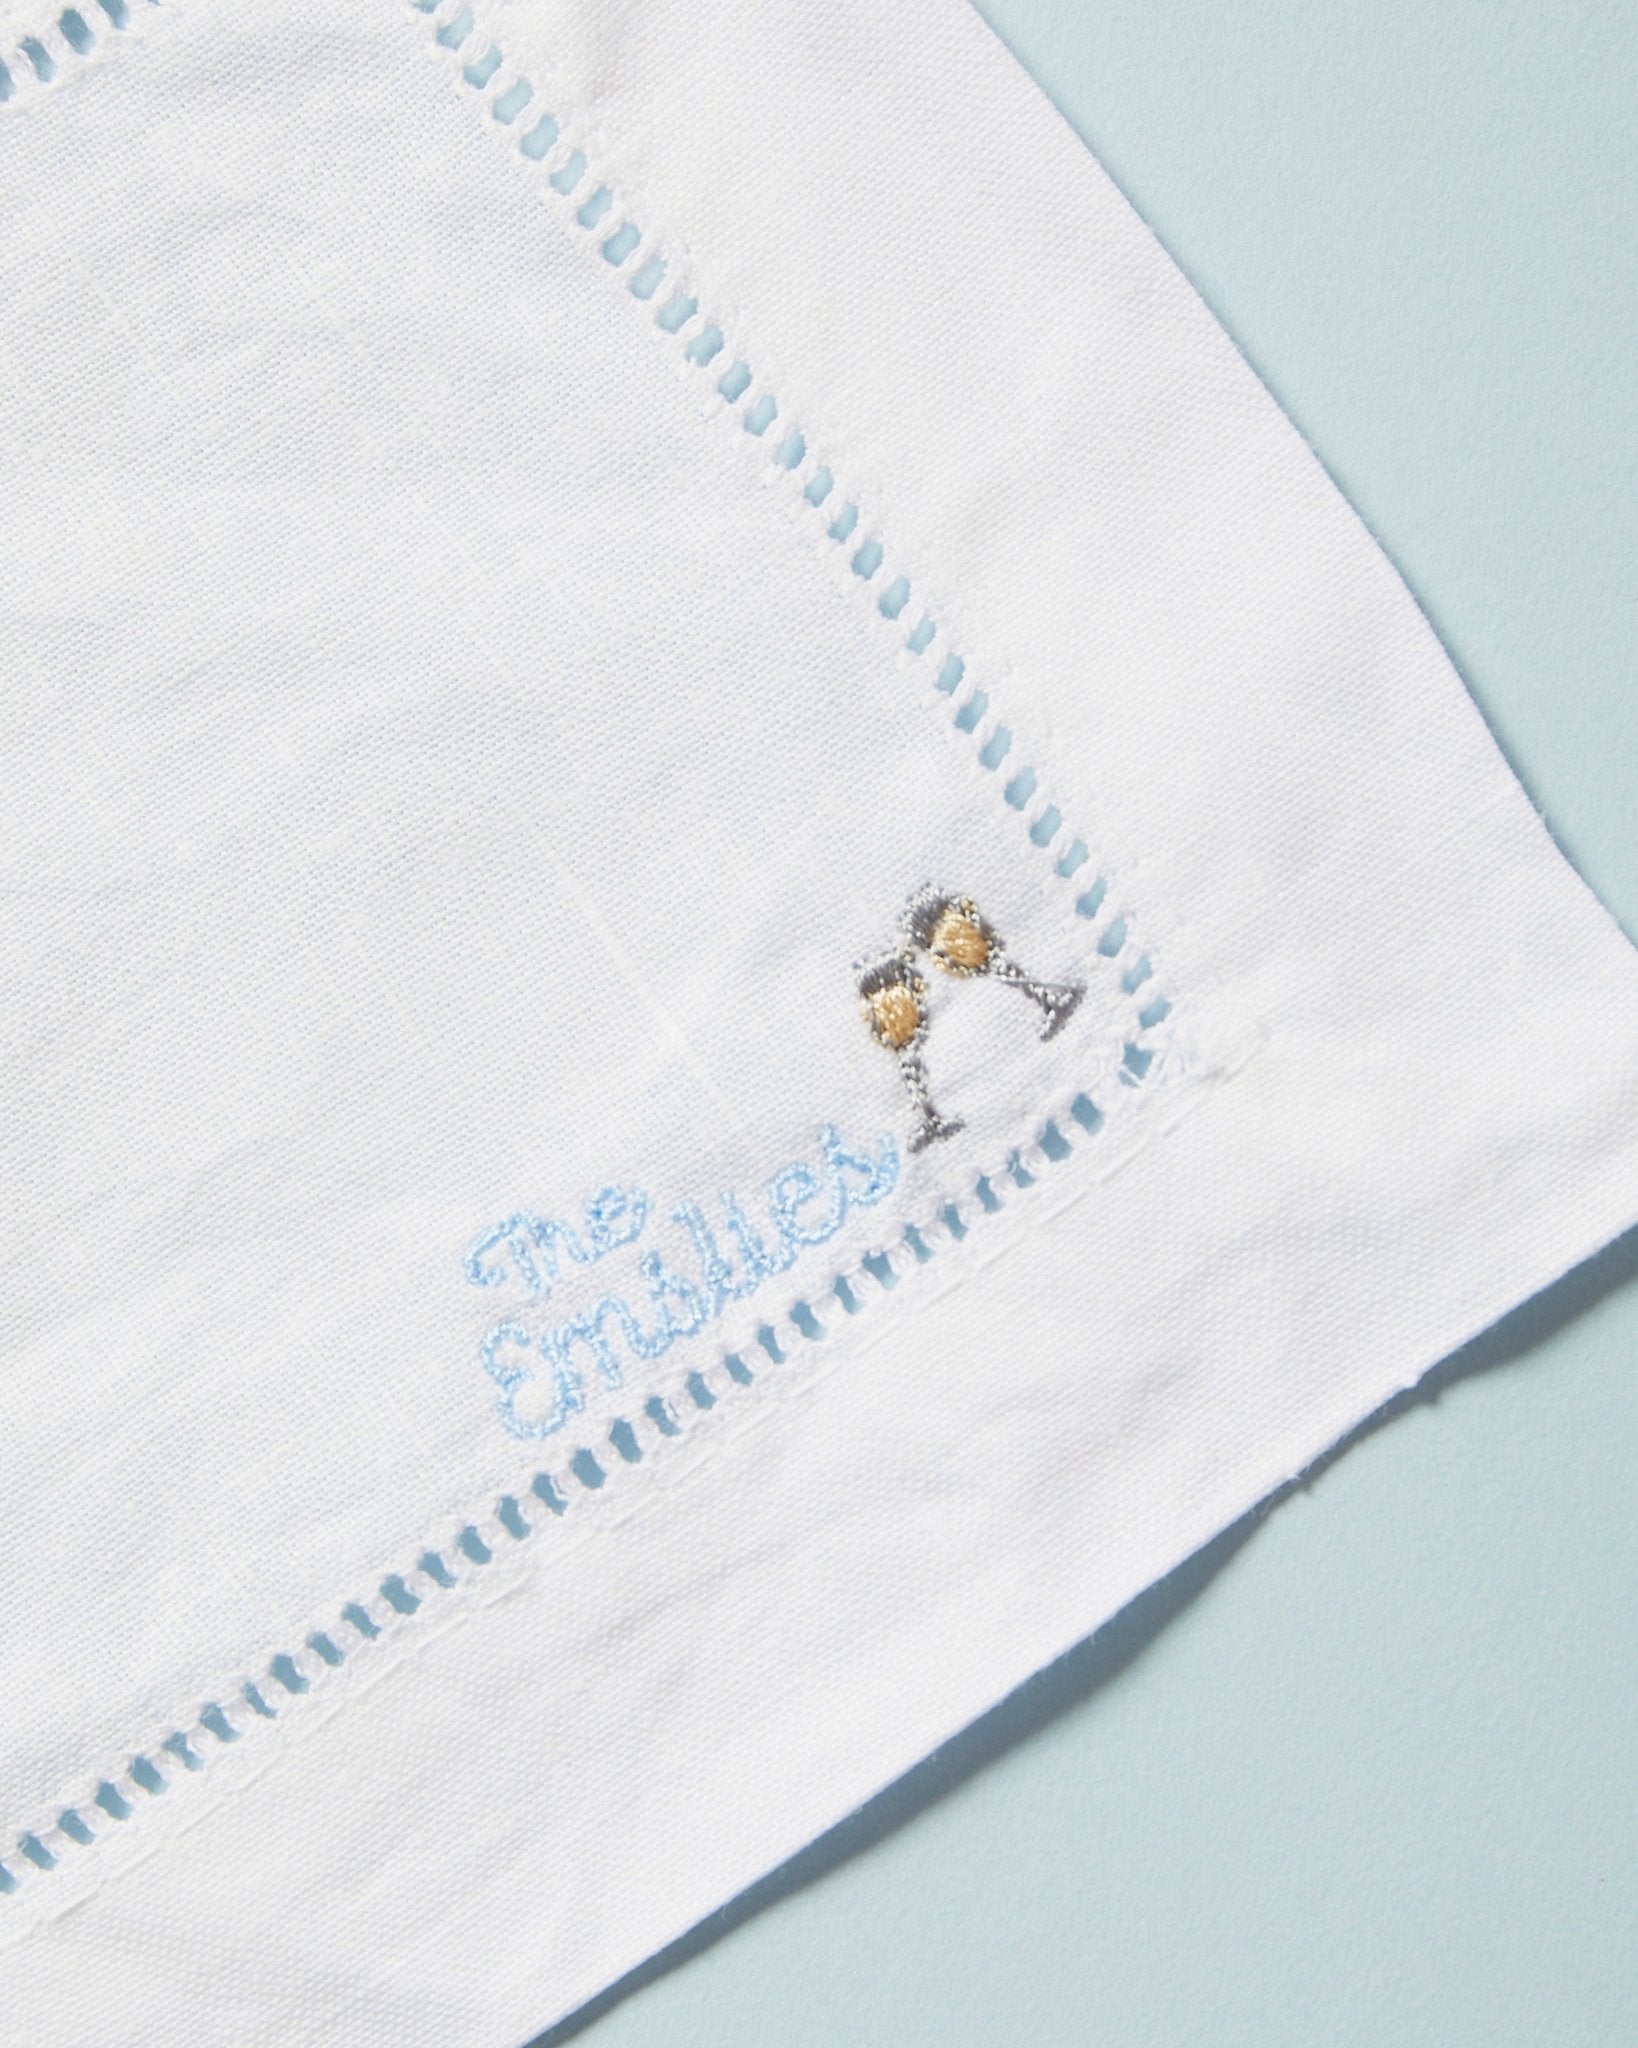 A cocktail napkin with a custom embroidered name and cocktail motif. 